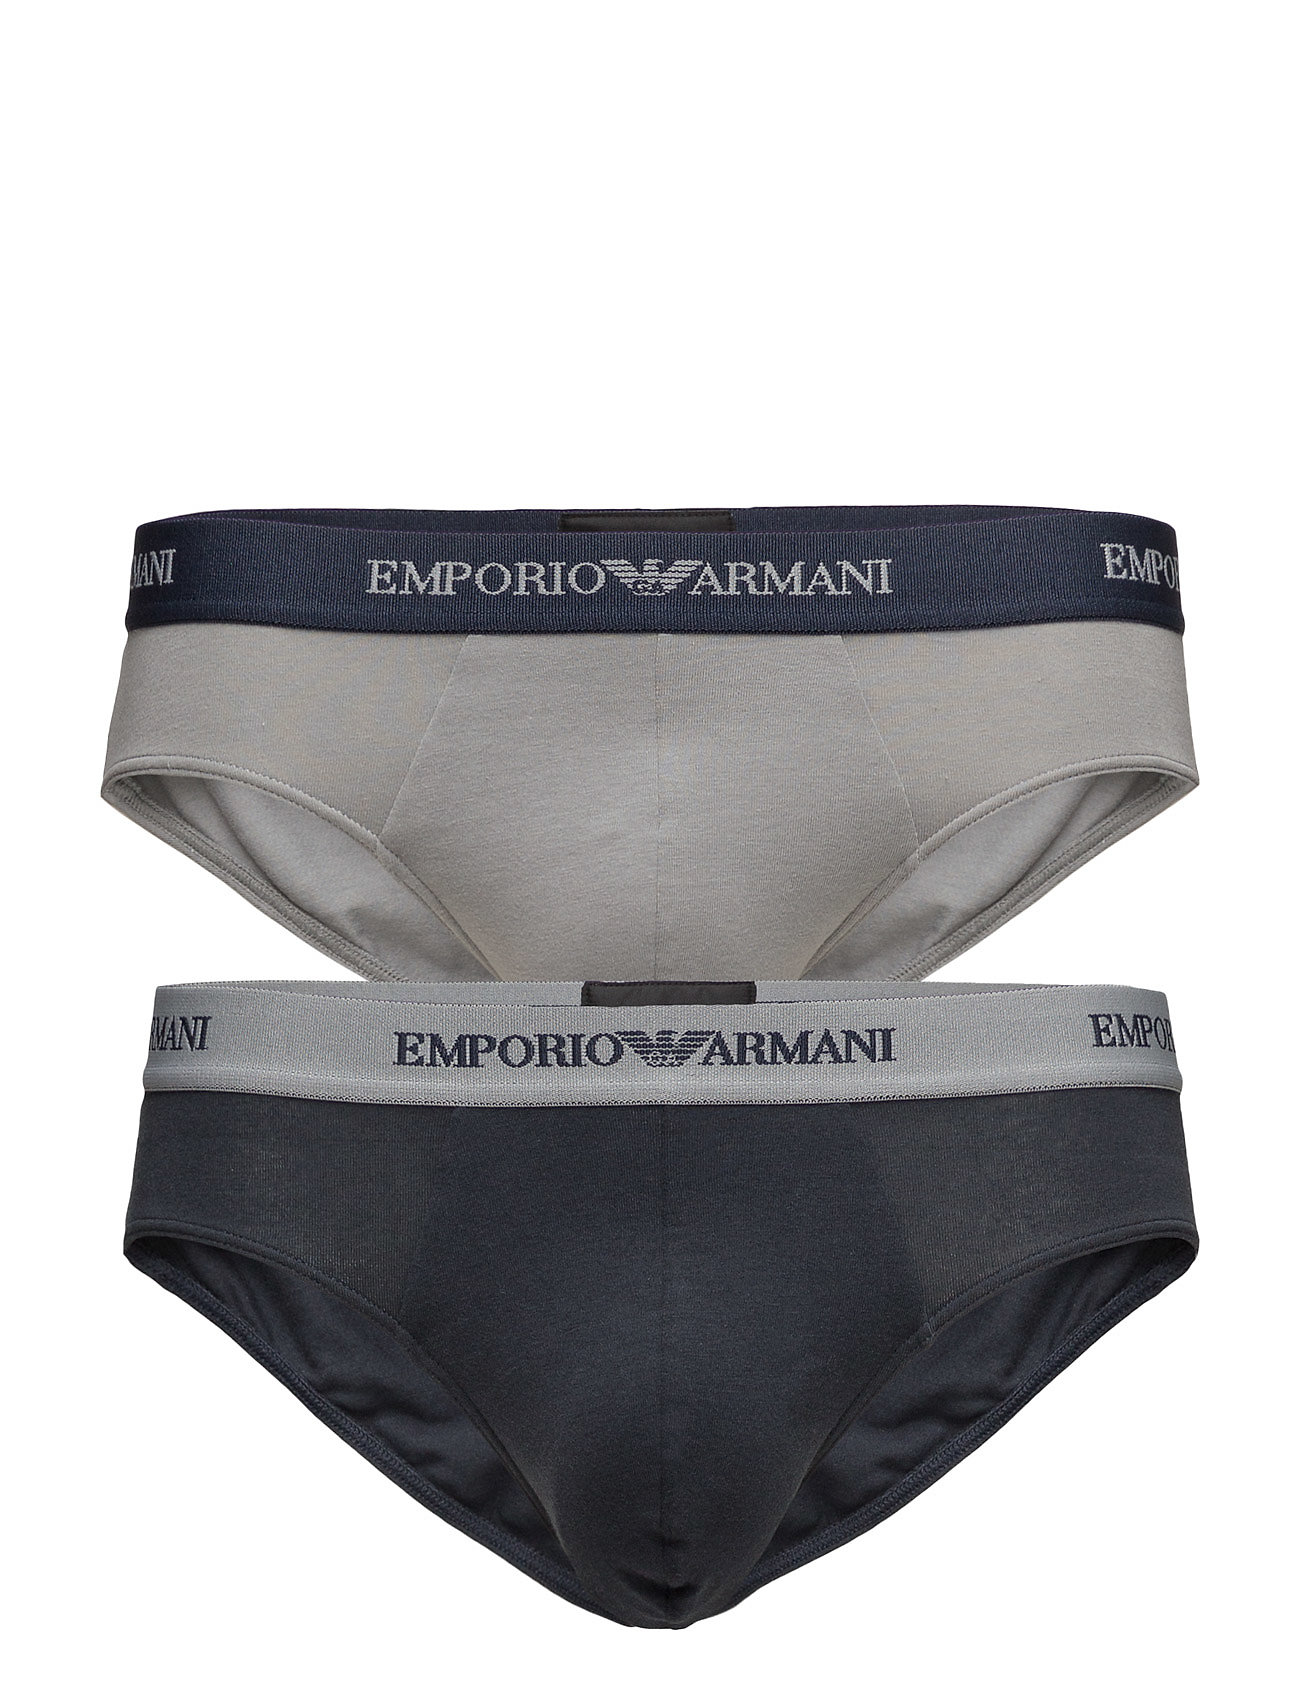 Mens Knit 2Pack Brie Underbukser Y-front Briefs Multi/patterned Emporio Armani